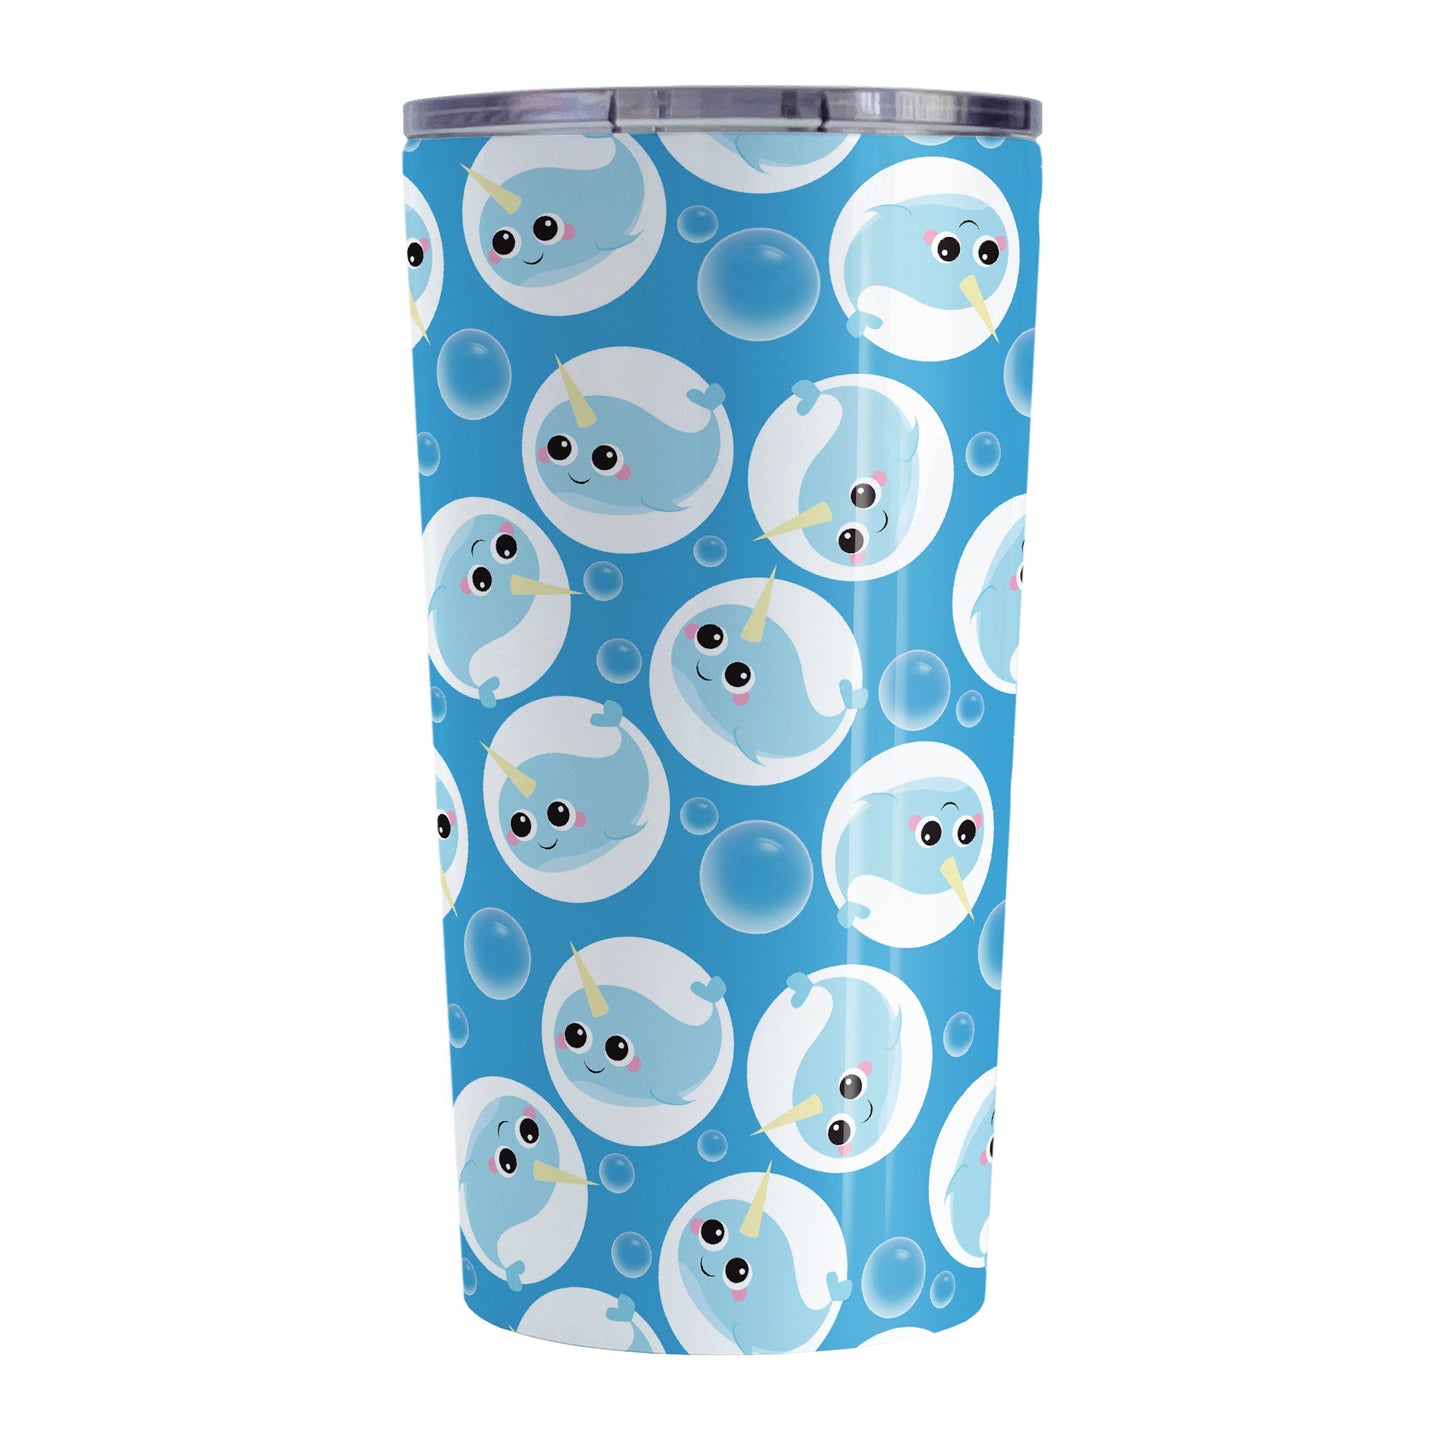 Cute Blue Narwhal Bubble Pattern Tumbler Cup (20oz, stainless steel insulated) at Amy's Coffee Mugs